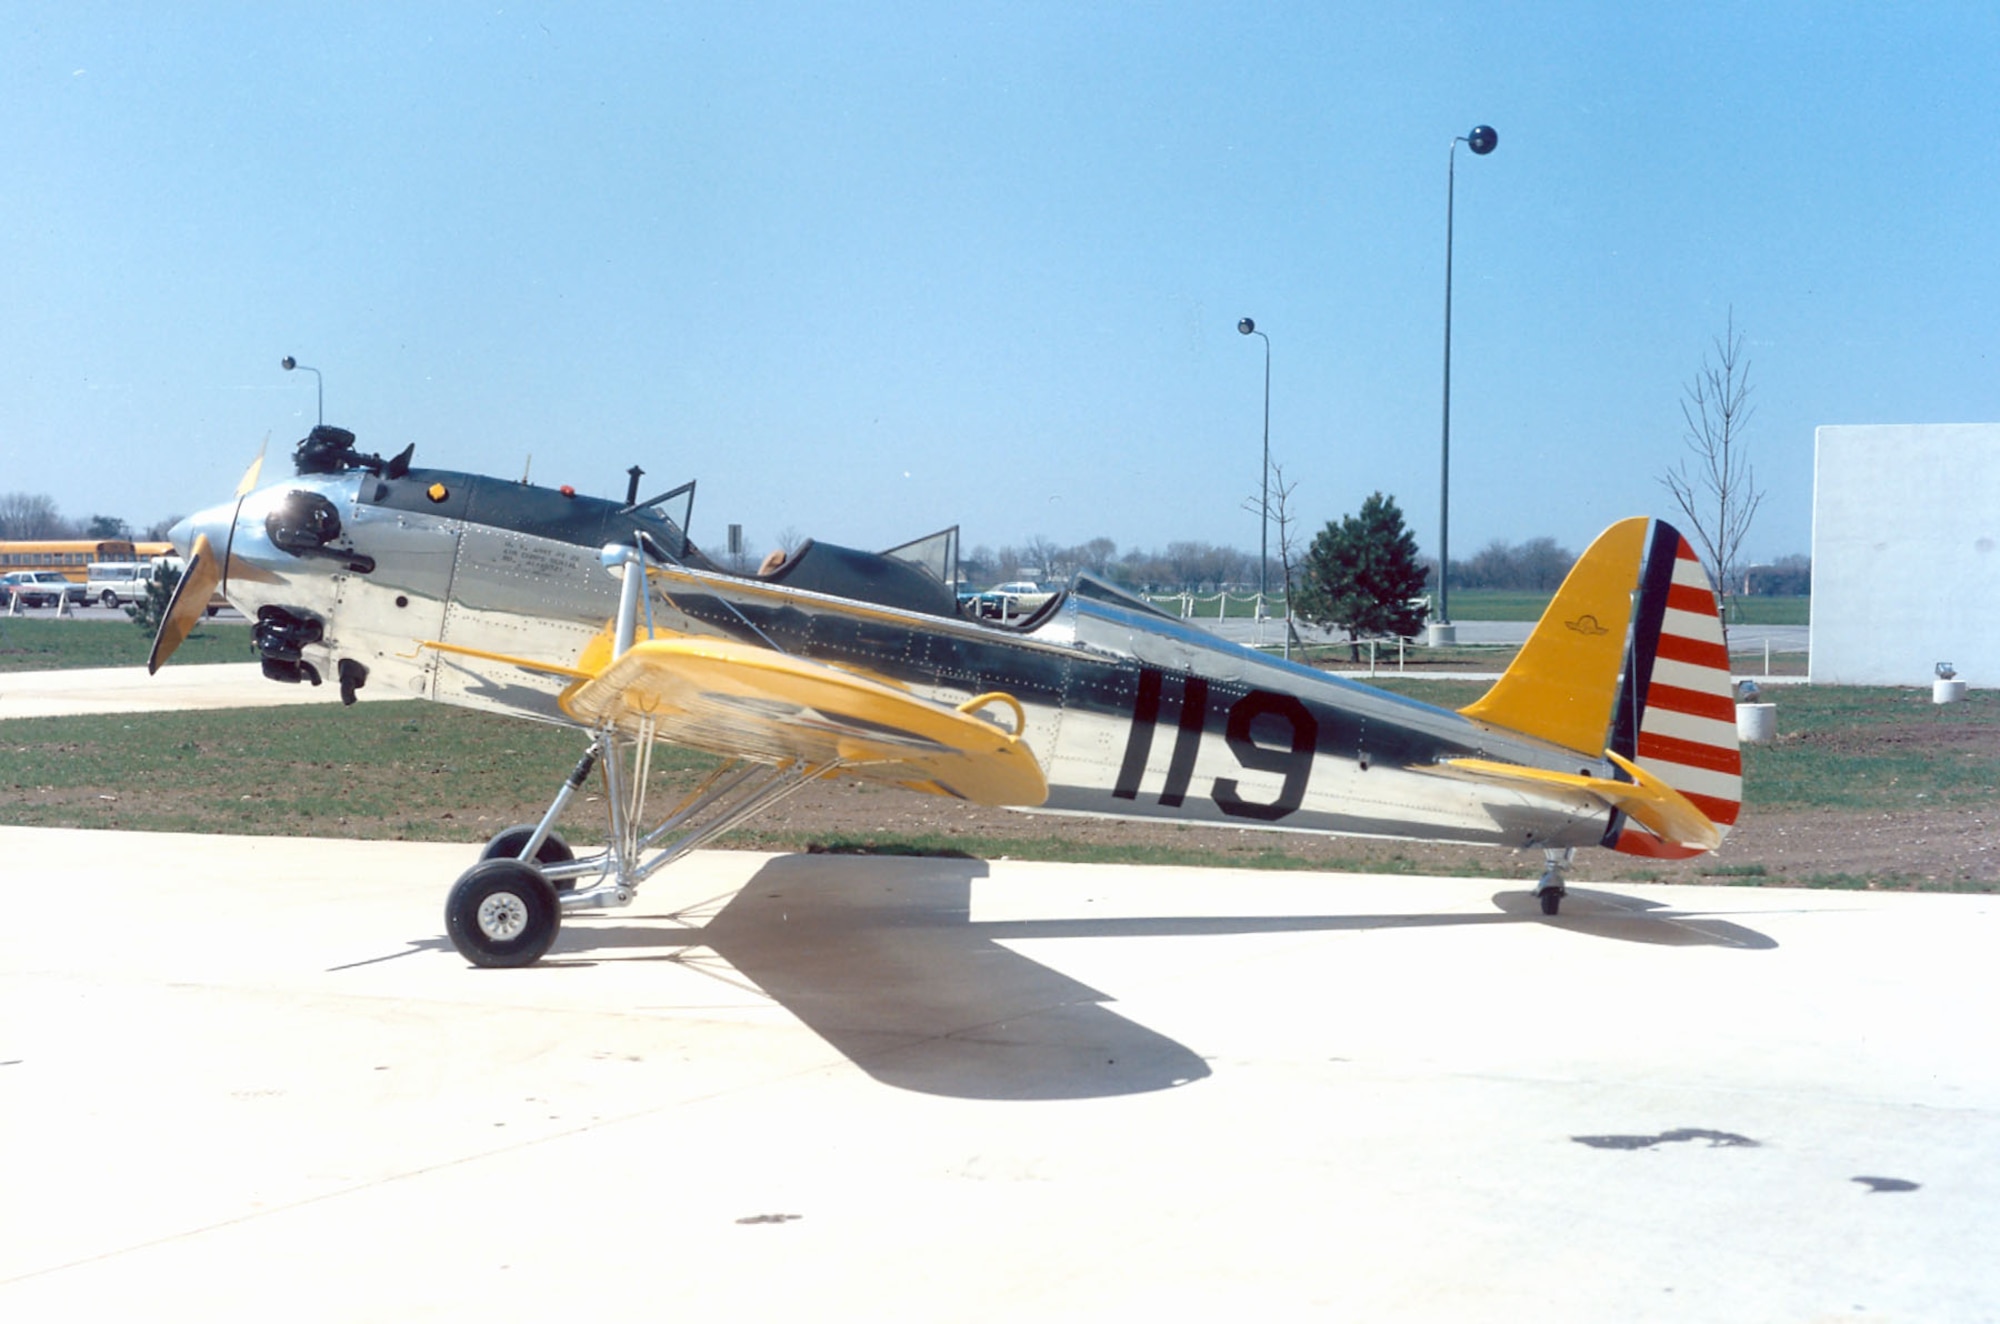 DAYTON, Ohio -- Ryan PT-22 Recruit at the National Museum of the United States Air Force. (U.S. Air Force photo)